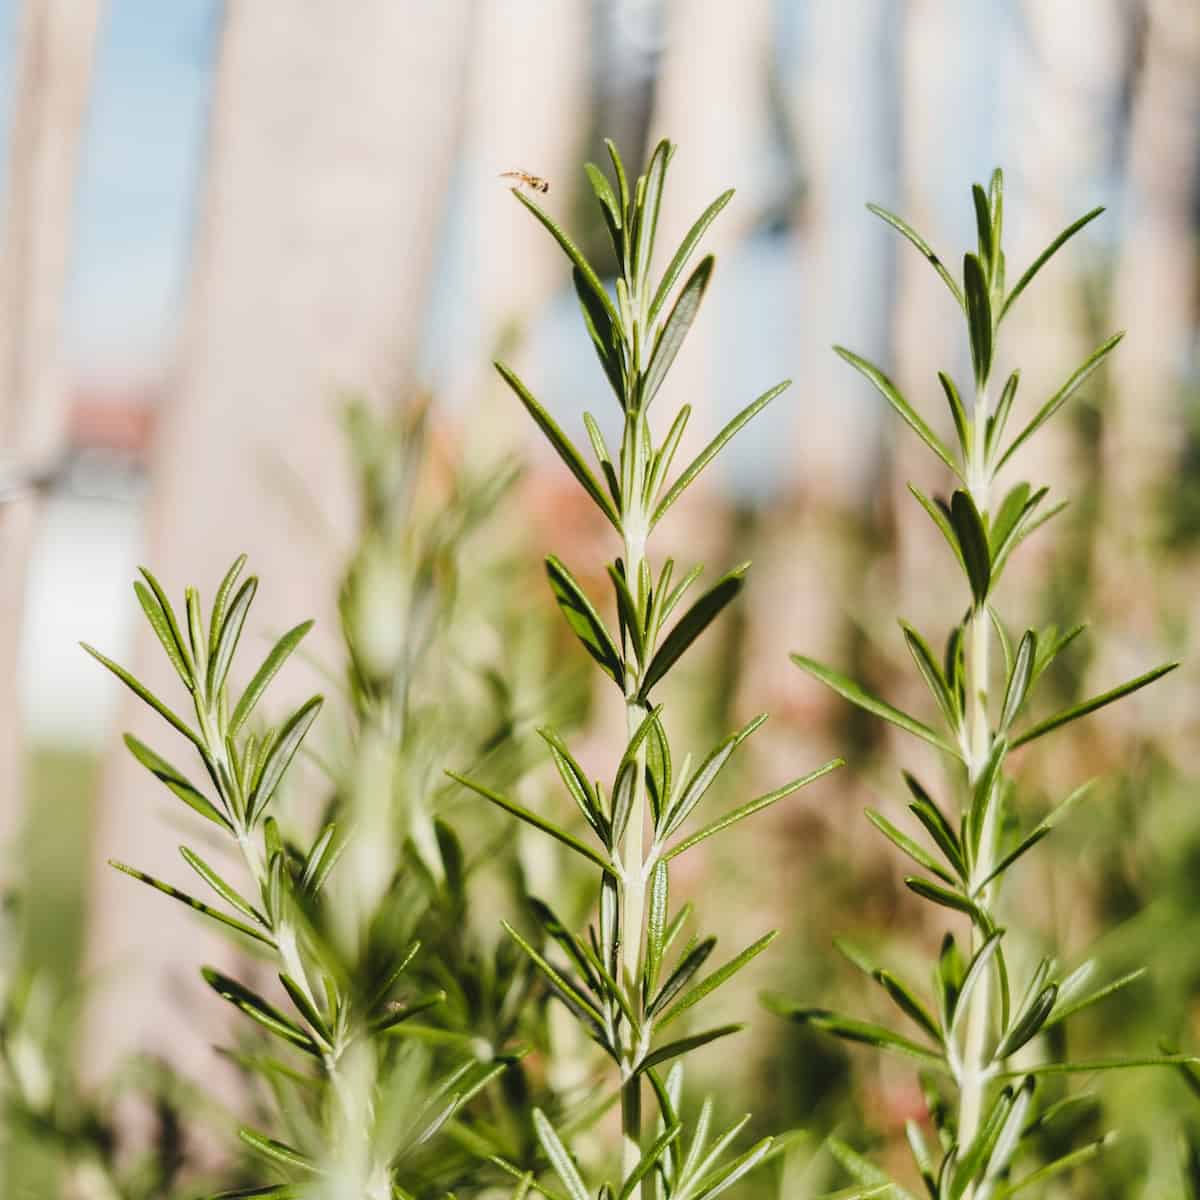 Image of Rosemary bad companion plant for mint